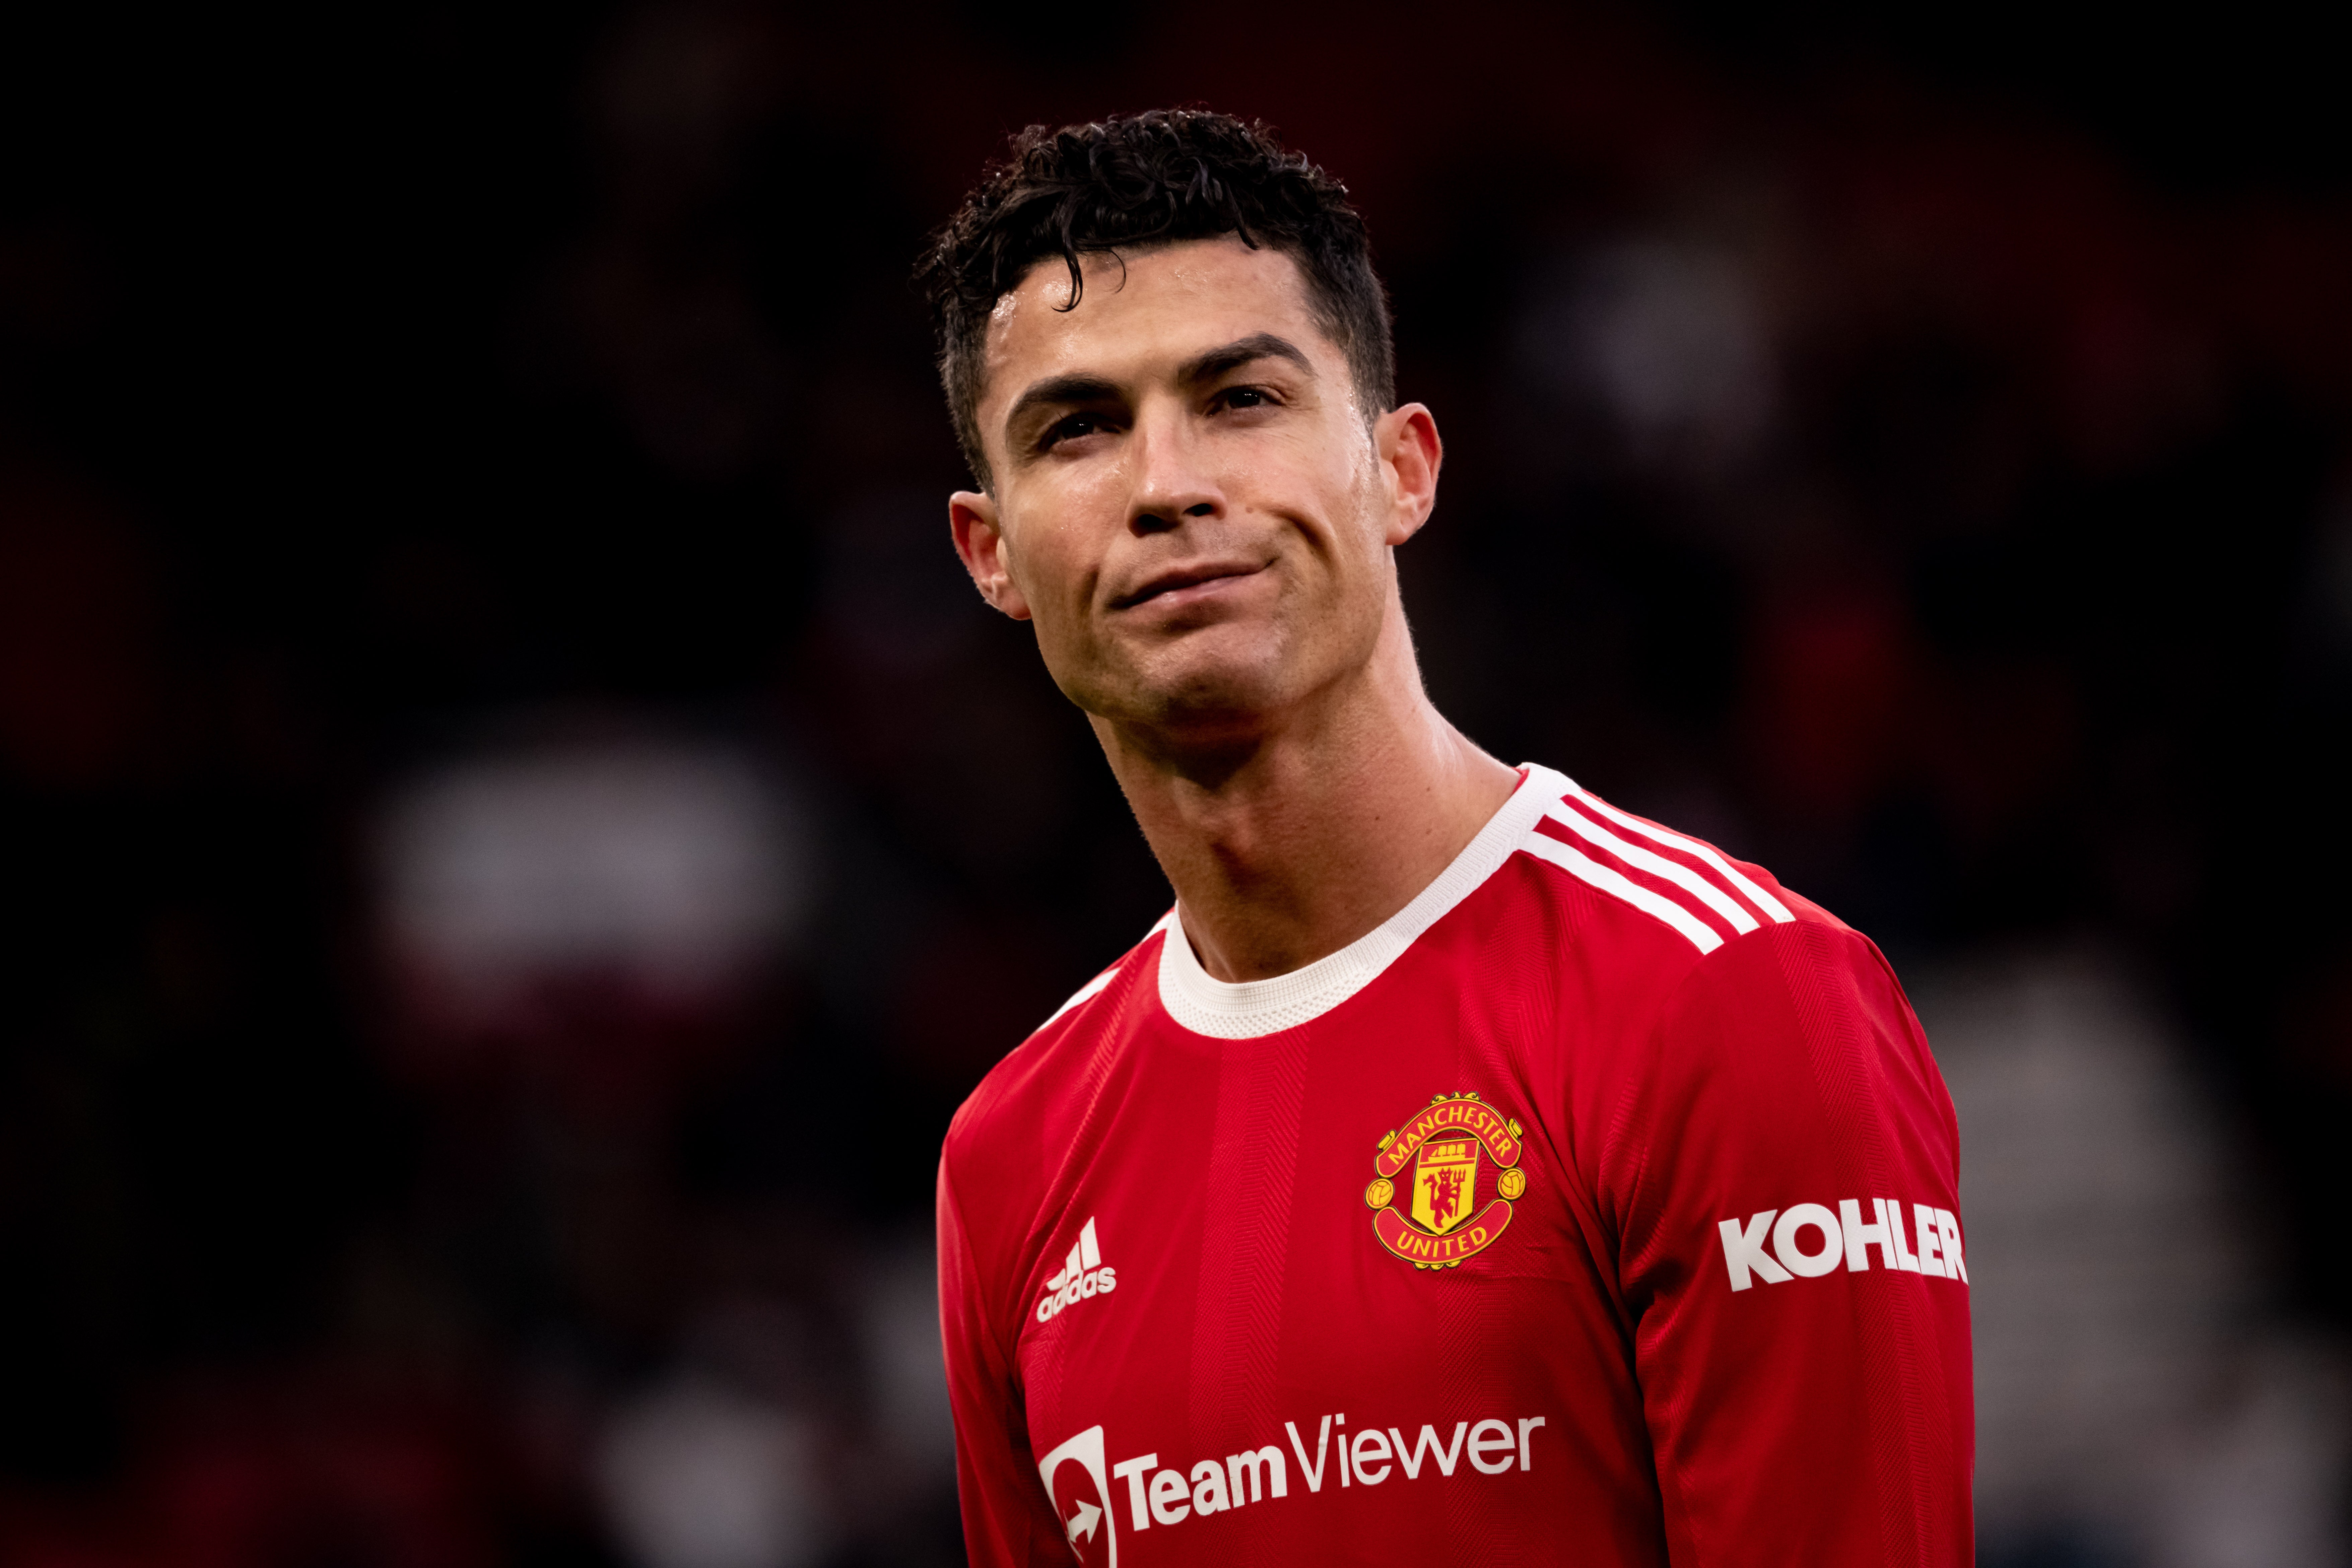 Cristiano Ronaldo: Ralf Rangnick explains Manchester United striker's absence due to injury | The Independent